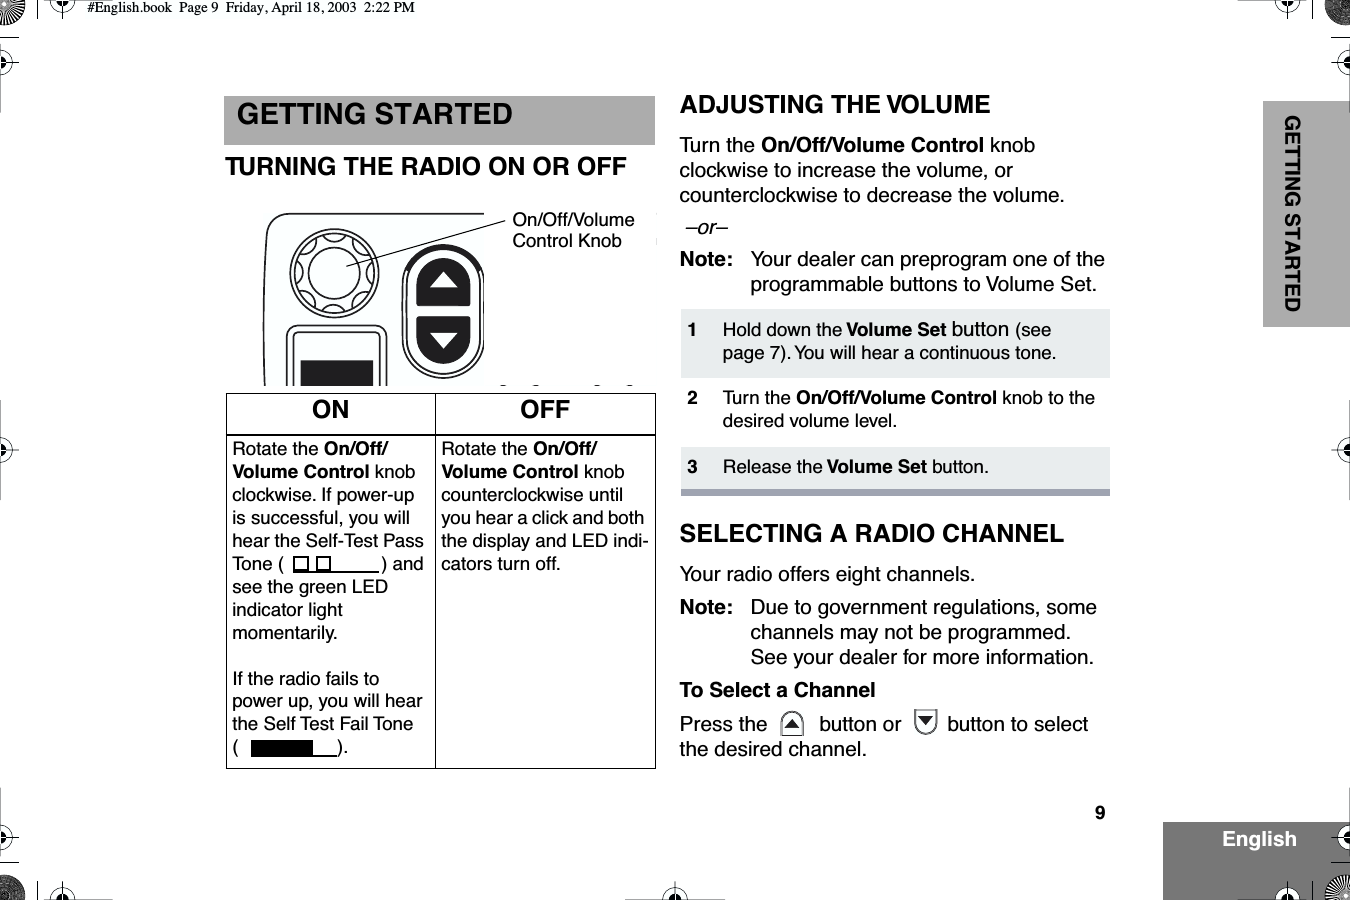  9 EnglishGETTING STARTED GETTING STARTED TURNING THE RADIO ON OR OFFADJUSTING THE VOLUME Tu rn the  On/Off/Volume Control  knob clockwise to increase the volume, or counterclockwise to decrease the volume.   –or–   Note: Your dealer can preprogram one of the programmable buttons to Volume Set. SELECTING A RADIO CHANNEL Your radio offers eight channels. Note: Due to government regulations, some channels may not be programmed. See your dealer for more information. To Select a Channel Press the    button or  button to select the desired channel. ON OFF Rotate the  On/Off/Volume Control  knob clockwise. If power-up is successful, you will hear the Self-Test Pass Tone ( ) and see the green LED indicator light momentarily. If the radio fails to power up, you will hear the Self Test Fail Tone (). Rotate the  On/Off/Volume Control  knob counterclockwise until you hear a click and both the display and LED indi-cators turn off.On/Off/VolumeControl Knob 1 Hold down the  Volume Set   button  (see page 7). You will hear a continuous tone. 2 Tu rn the  On/Off/Volume Control  knob to the desired volume level. 3 Release the  Volume Set  button. #English.book  Page 9  Friday, April 18, 2003  2:22 PM